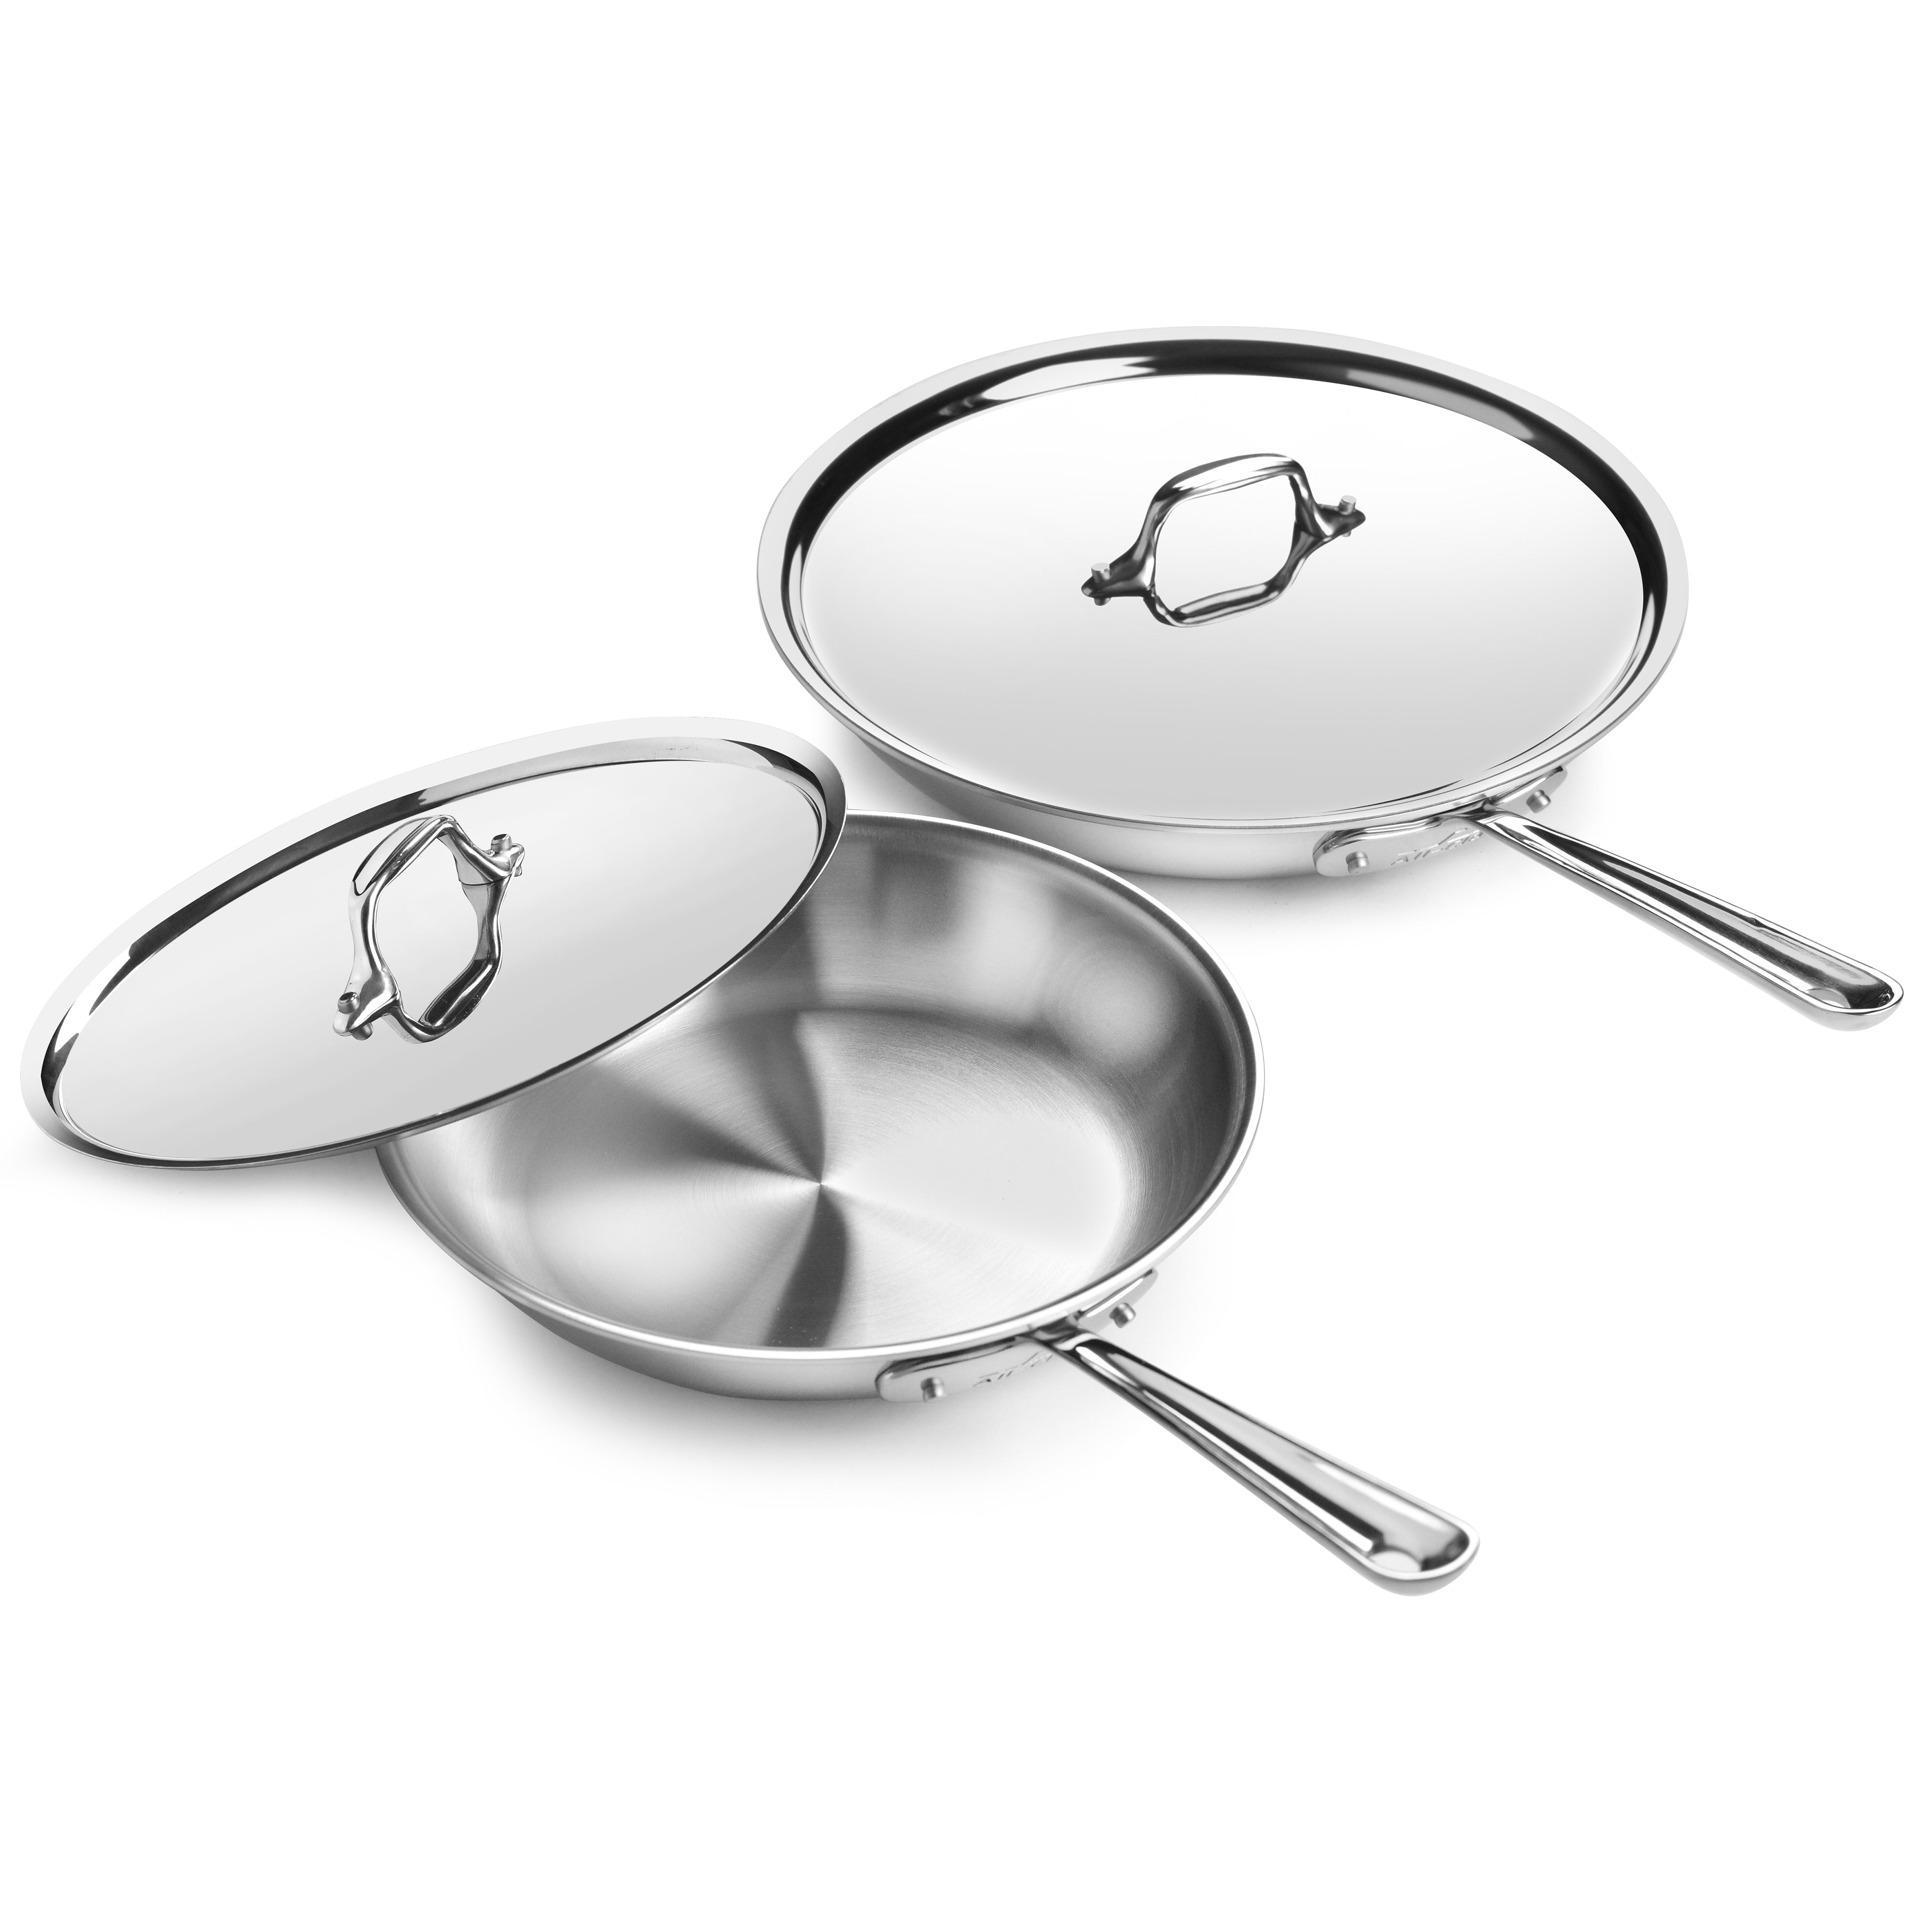 Tri-Ply Clad 10 PC Stainless Steel Cookware Set with Glass Lids